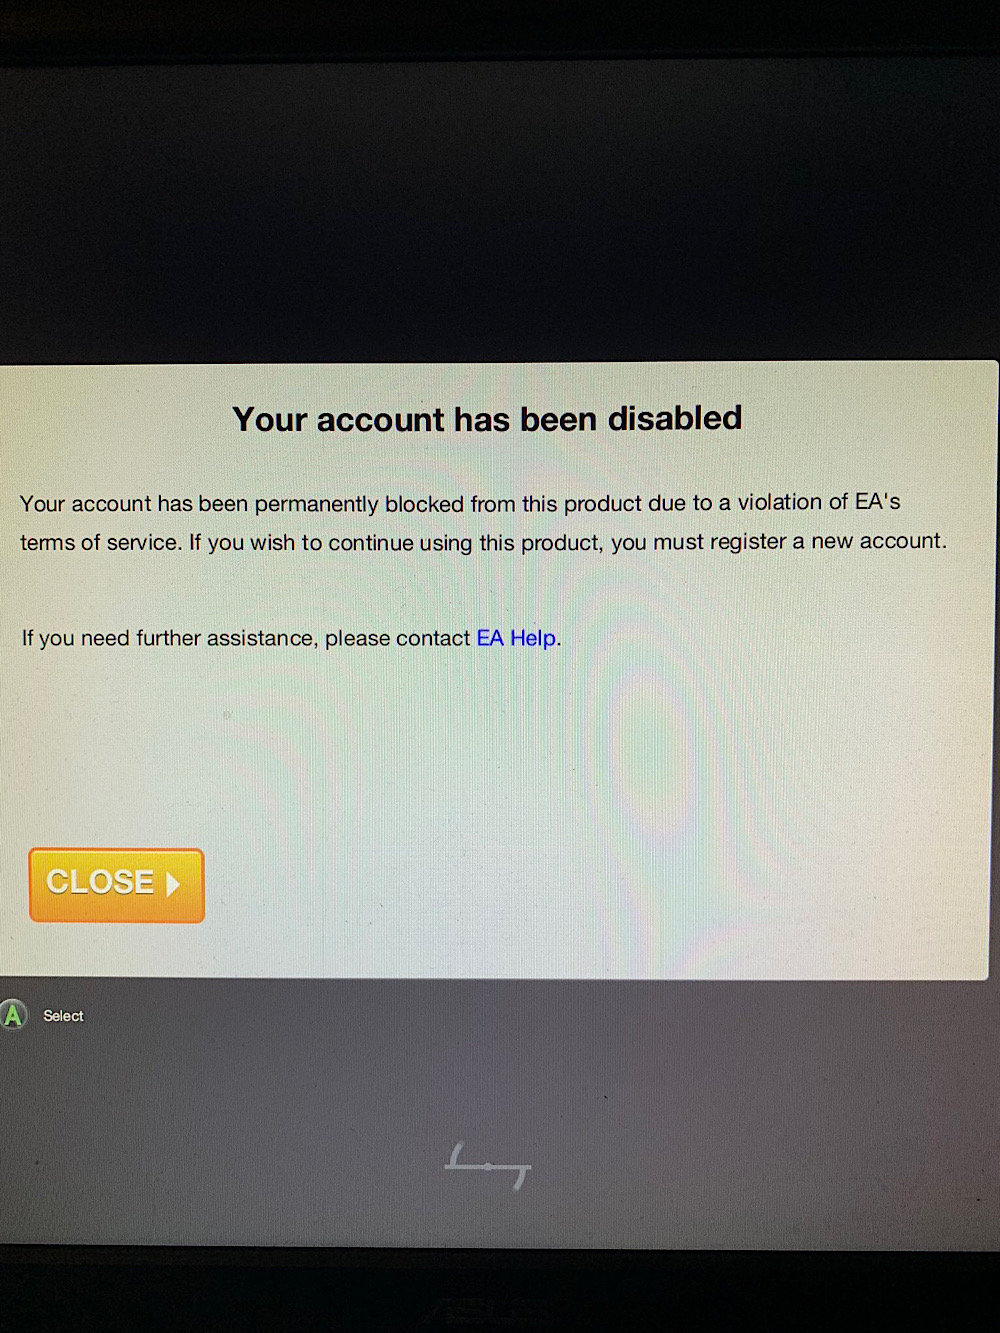 Kurt was told “your account has been disabled” when he attempted to use his EA account (Twitter - @Kurt0411Fifa)